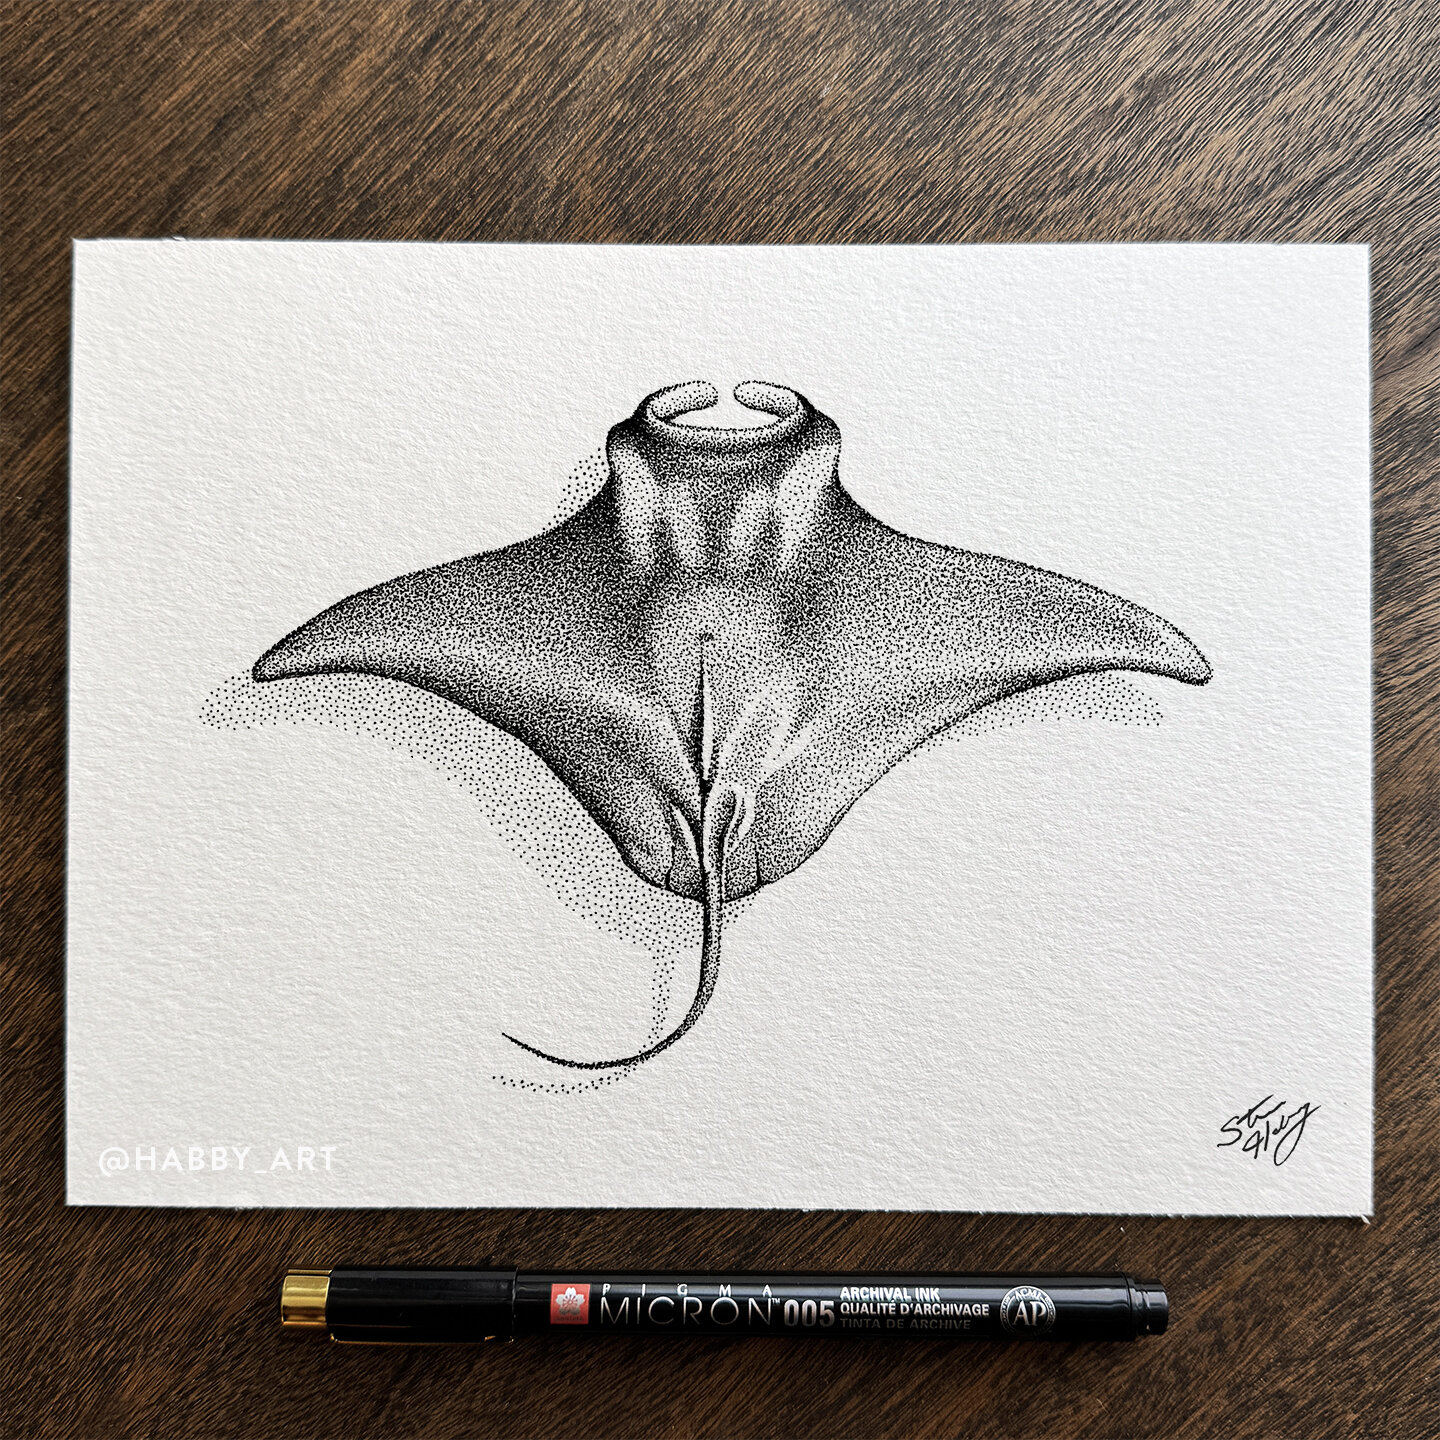 &ldquo;Manta&rdquo; &bull; A new one from my swimming in the shallows series. Inspired by my trip to Hawaii, where we swam with 10-foot manta rays at night. Attracted by the lights of our boat, they came within inches of us! 
.
.
.
.
.

#stippling #d